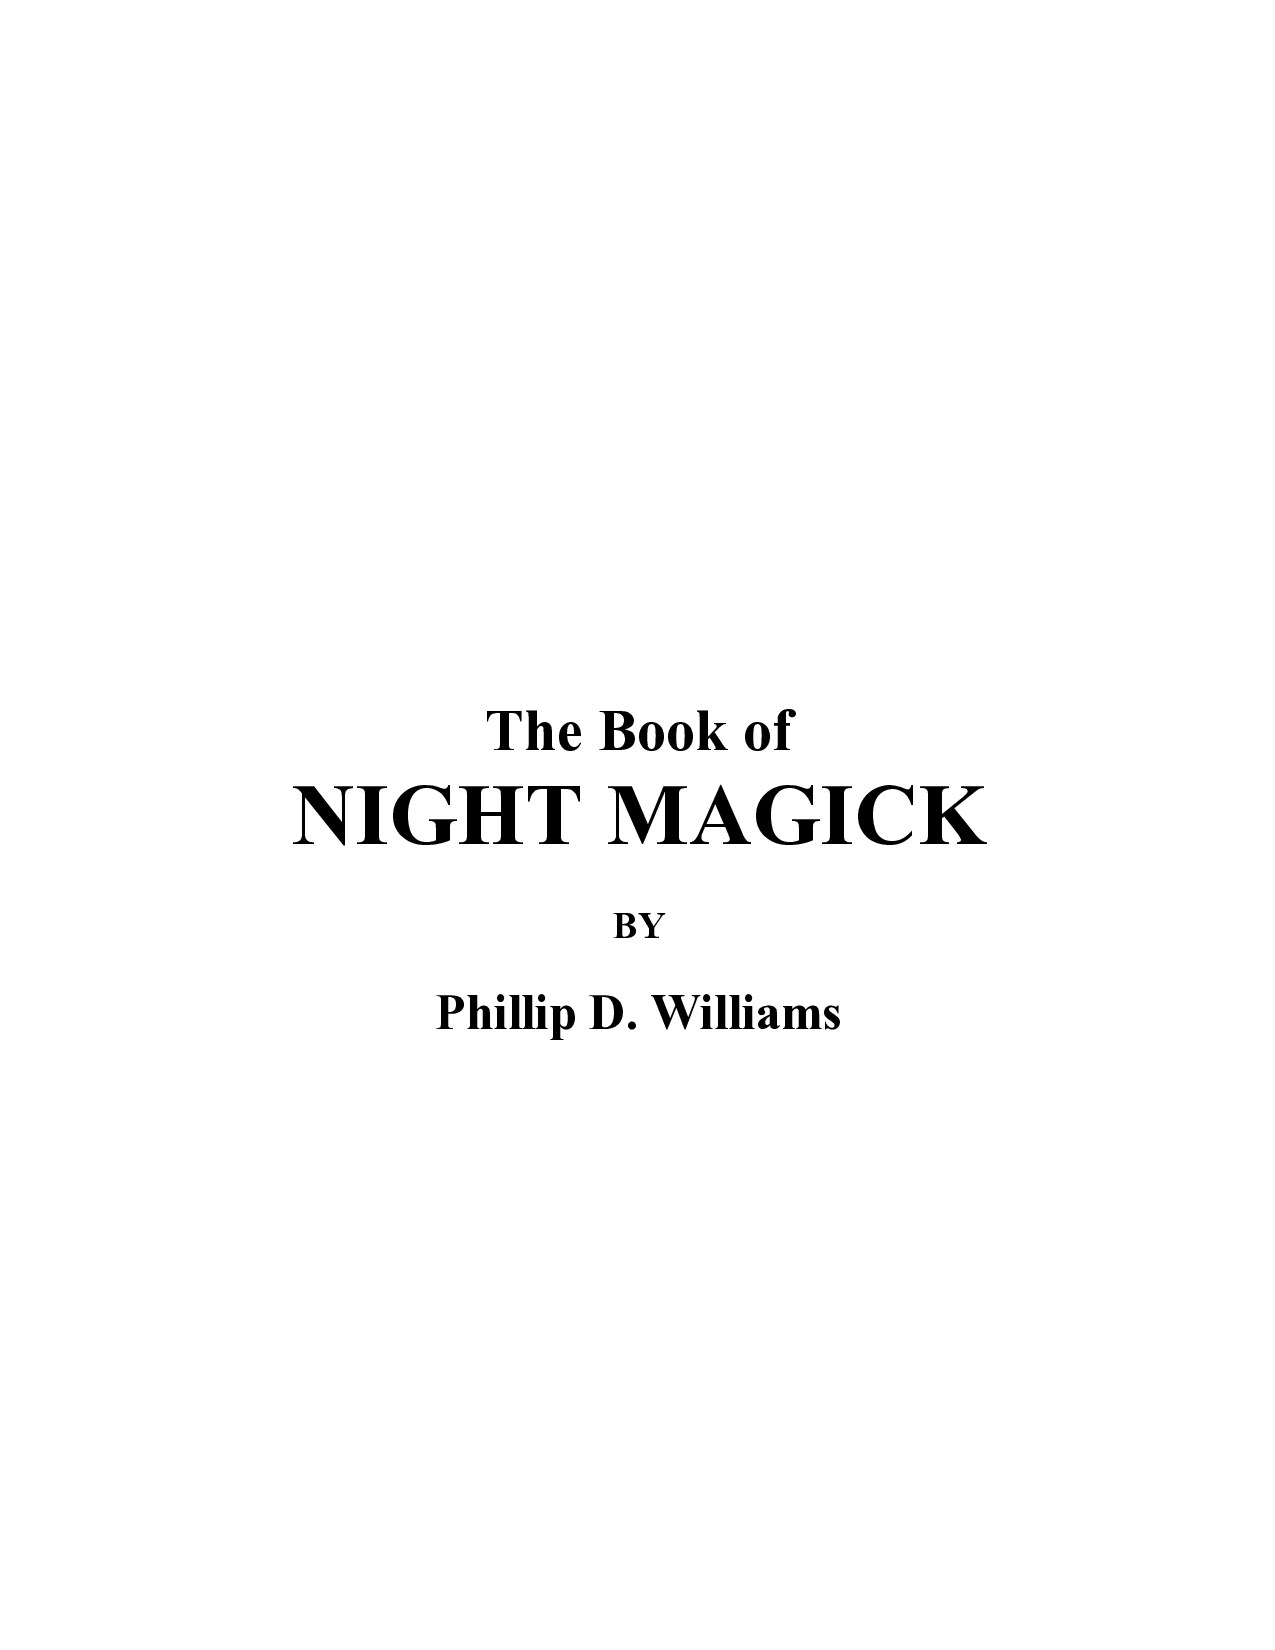 The Book of Night Magick